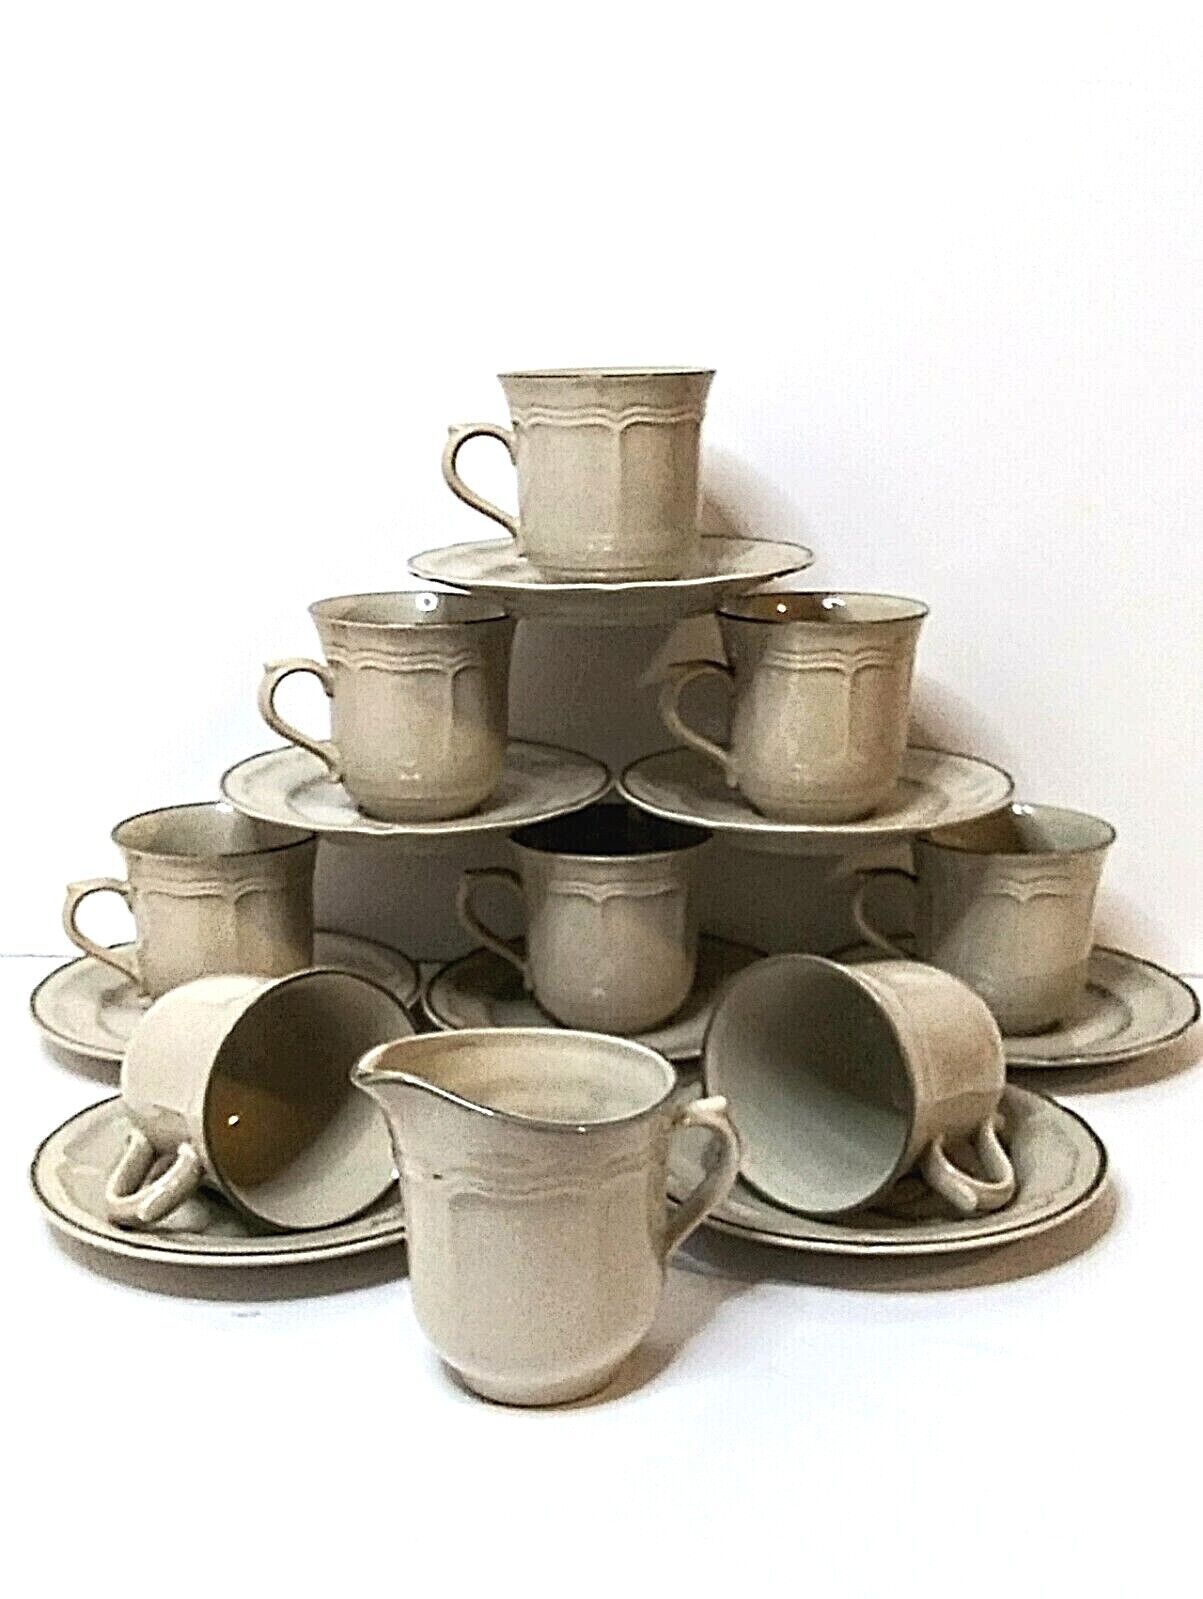 Stoneware NEWCOR coffee set of 8 with creamer  Vintage rare to find Japan